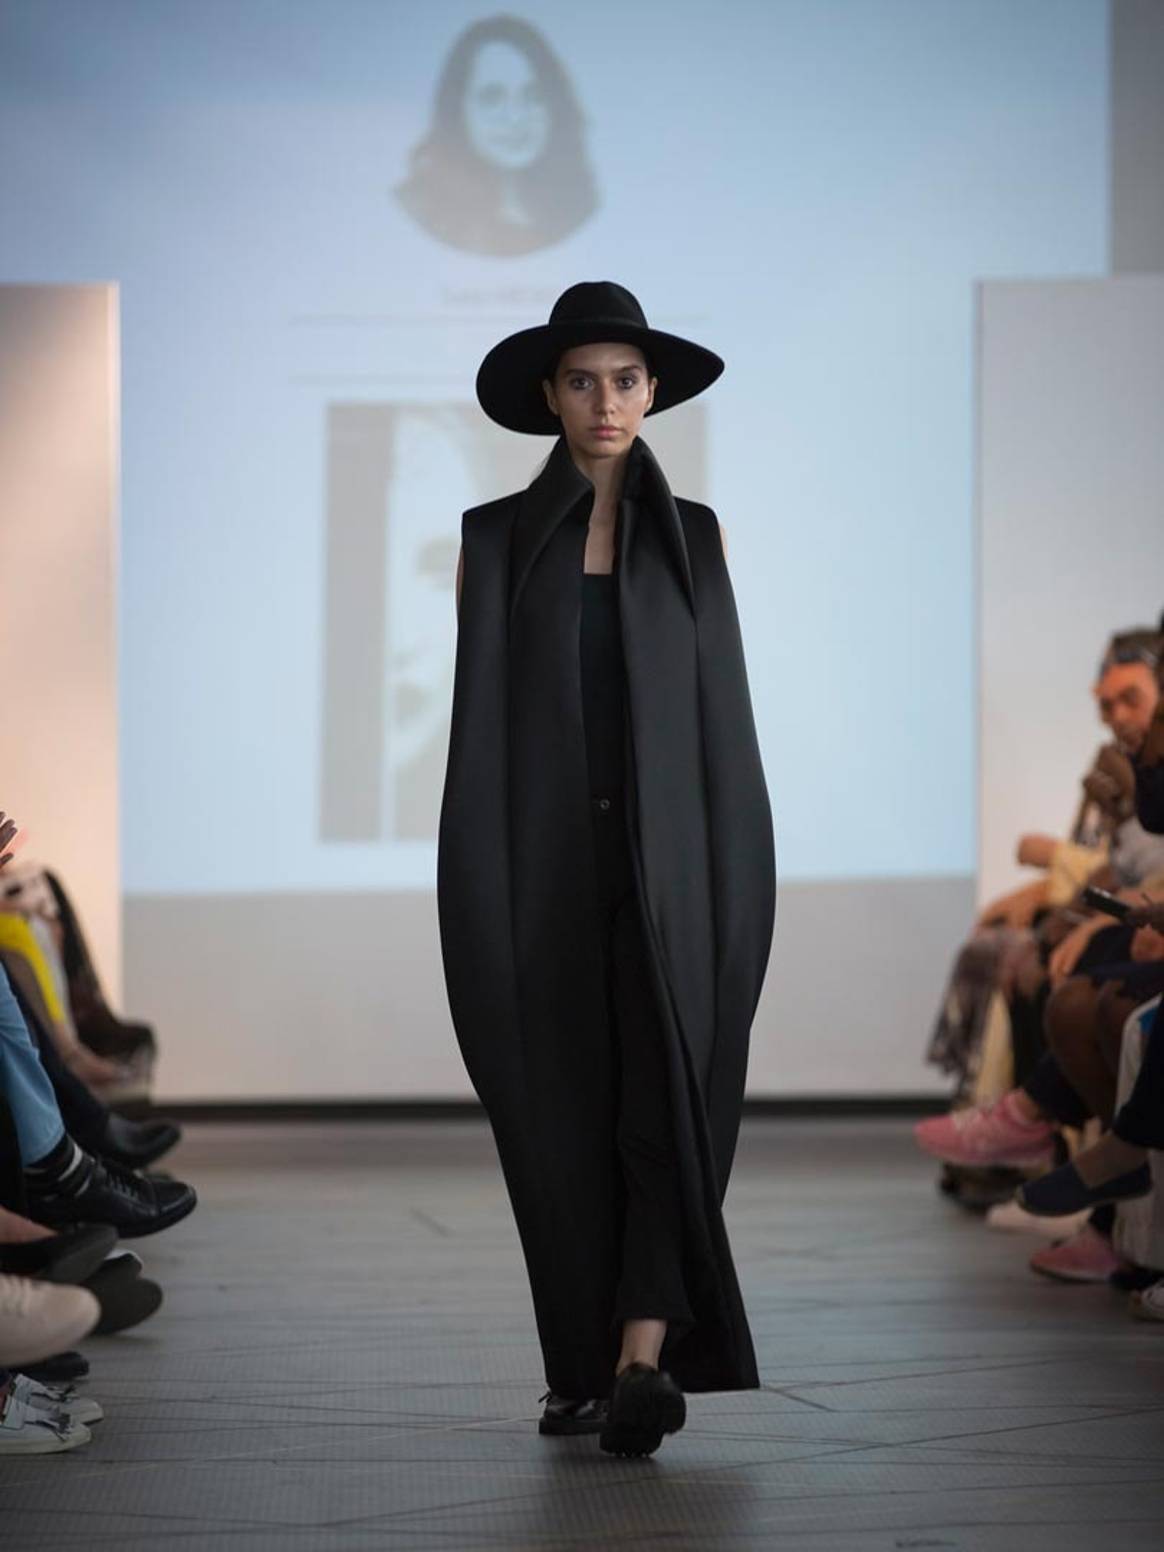 In Pictures: New Generation’s Fashion Show in Casablanca